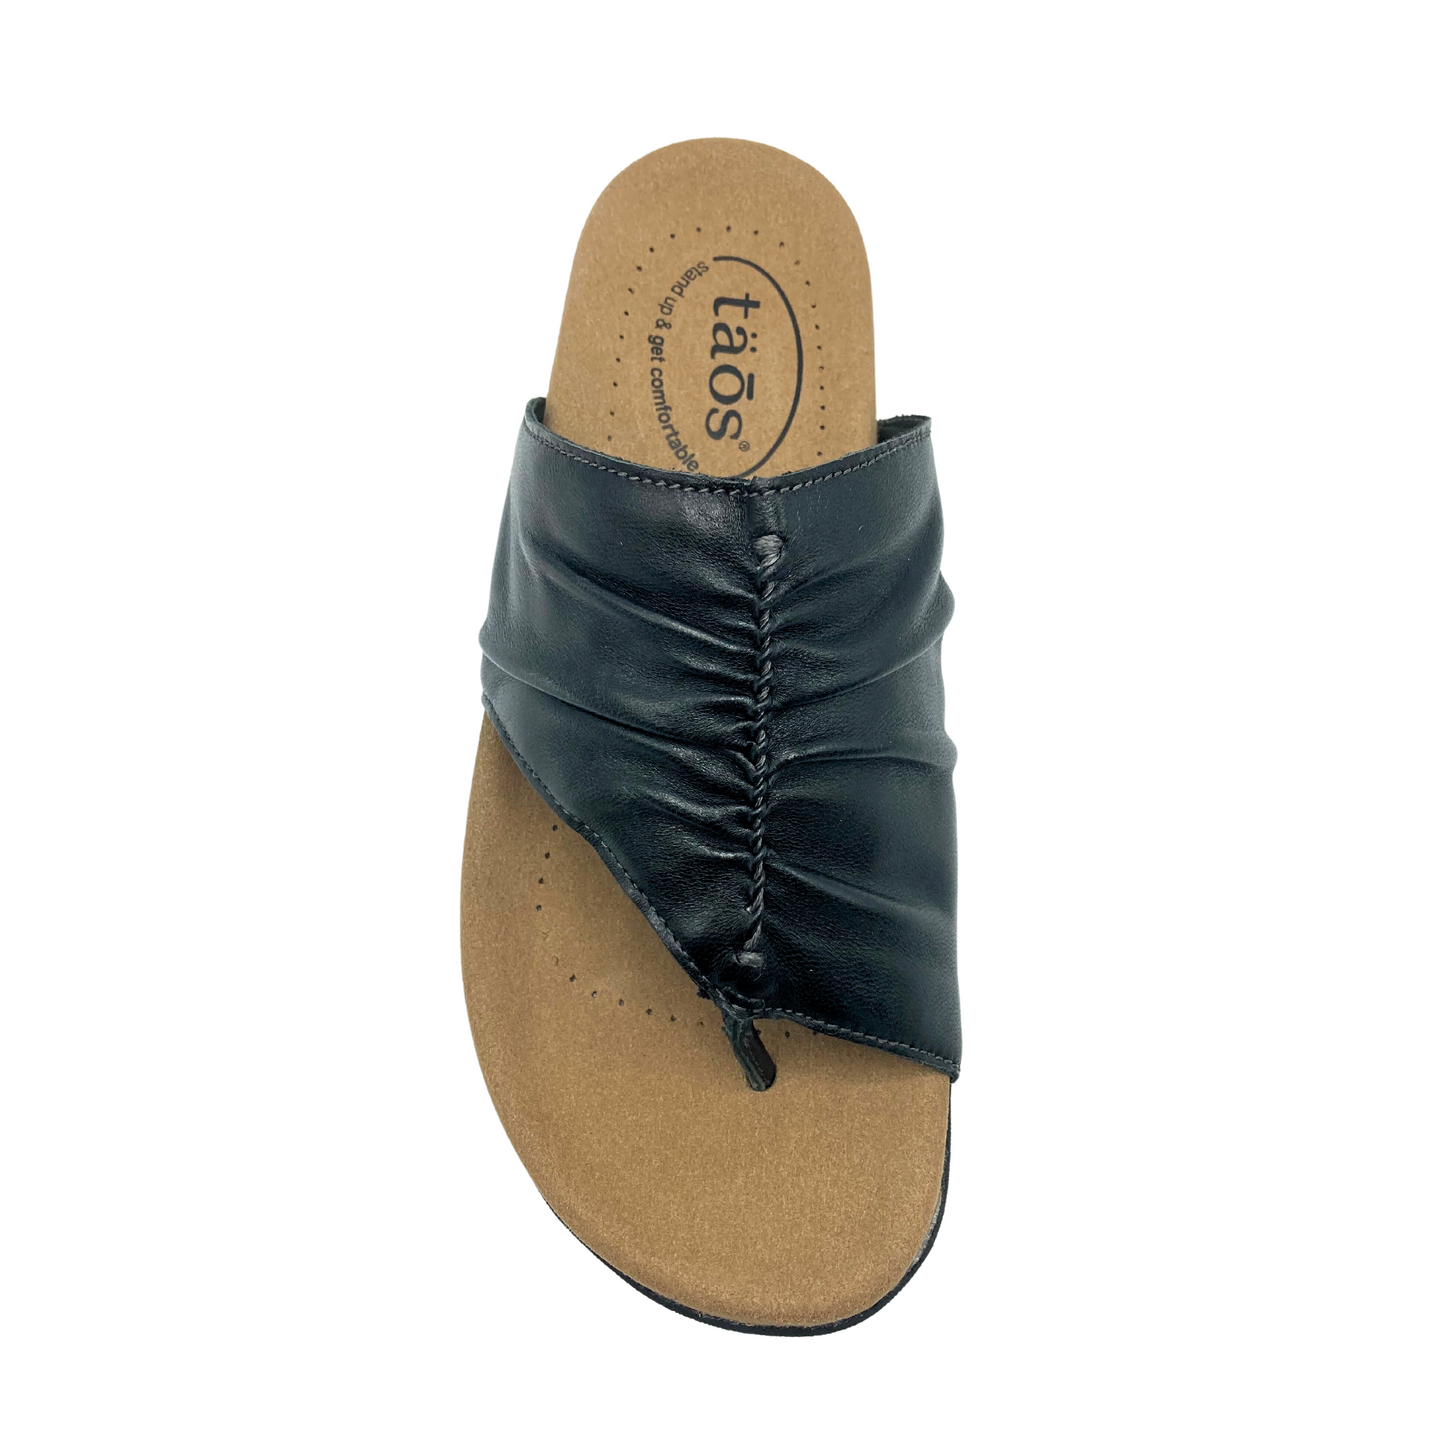 Top down view of the Taos Gift 2 mule sandal in black.  Ruching runs all across the top of the sandal.